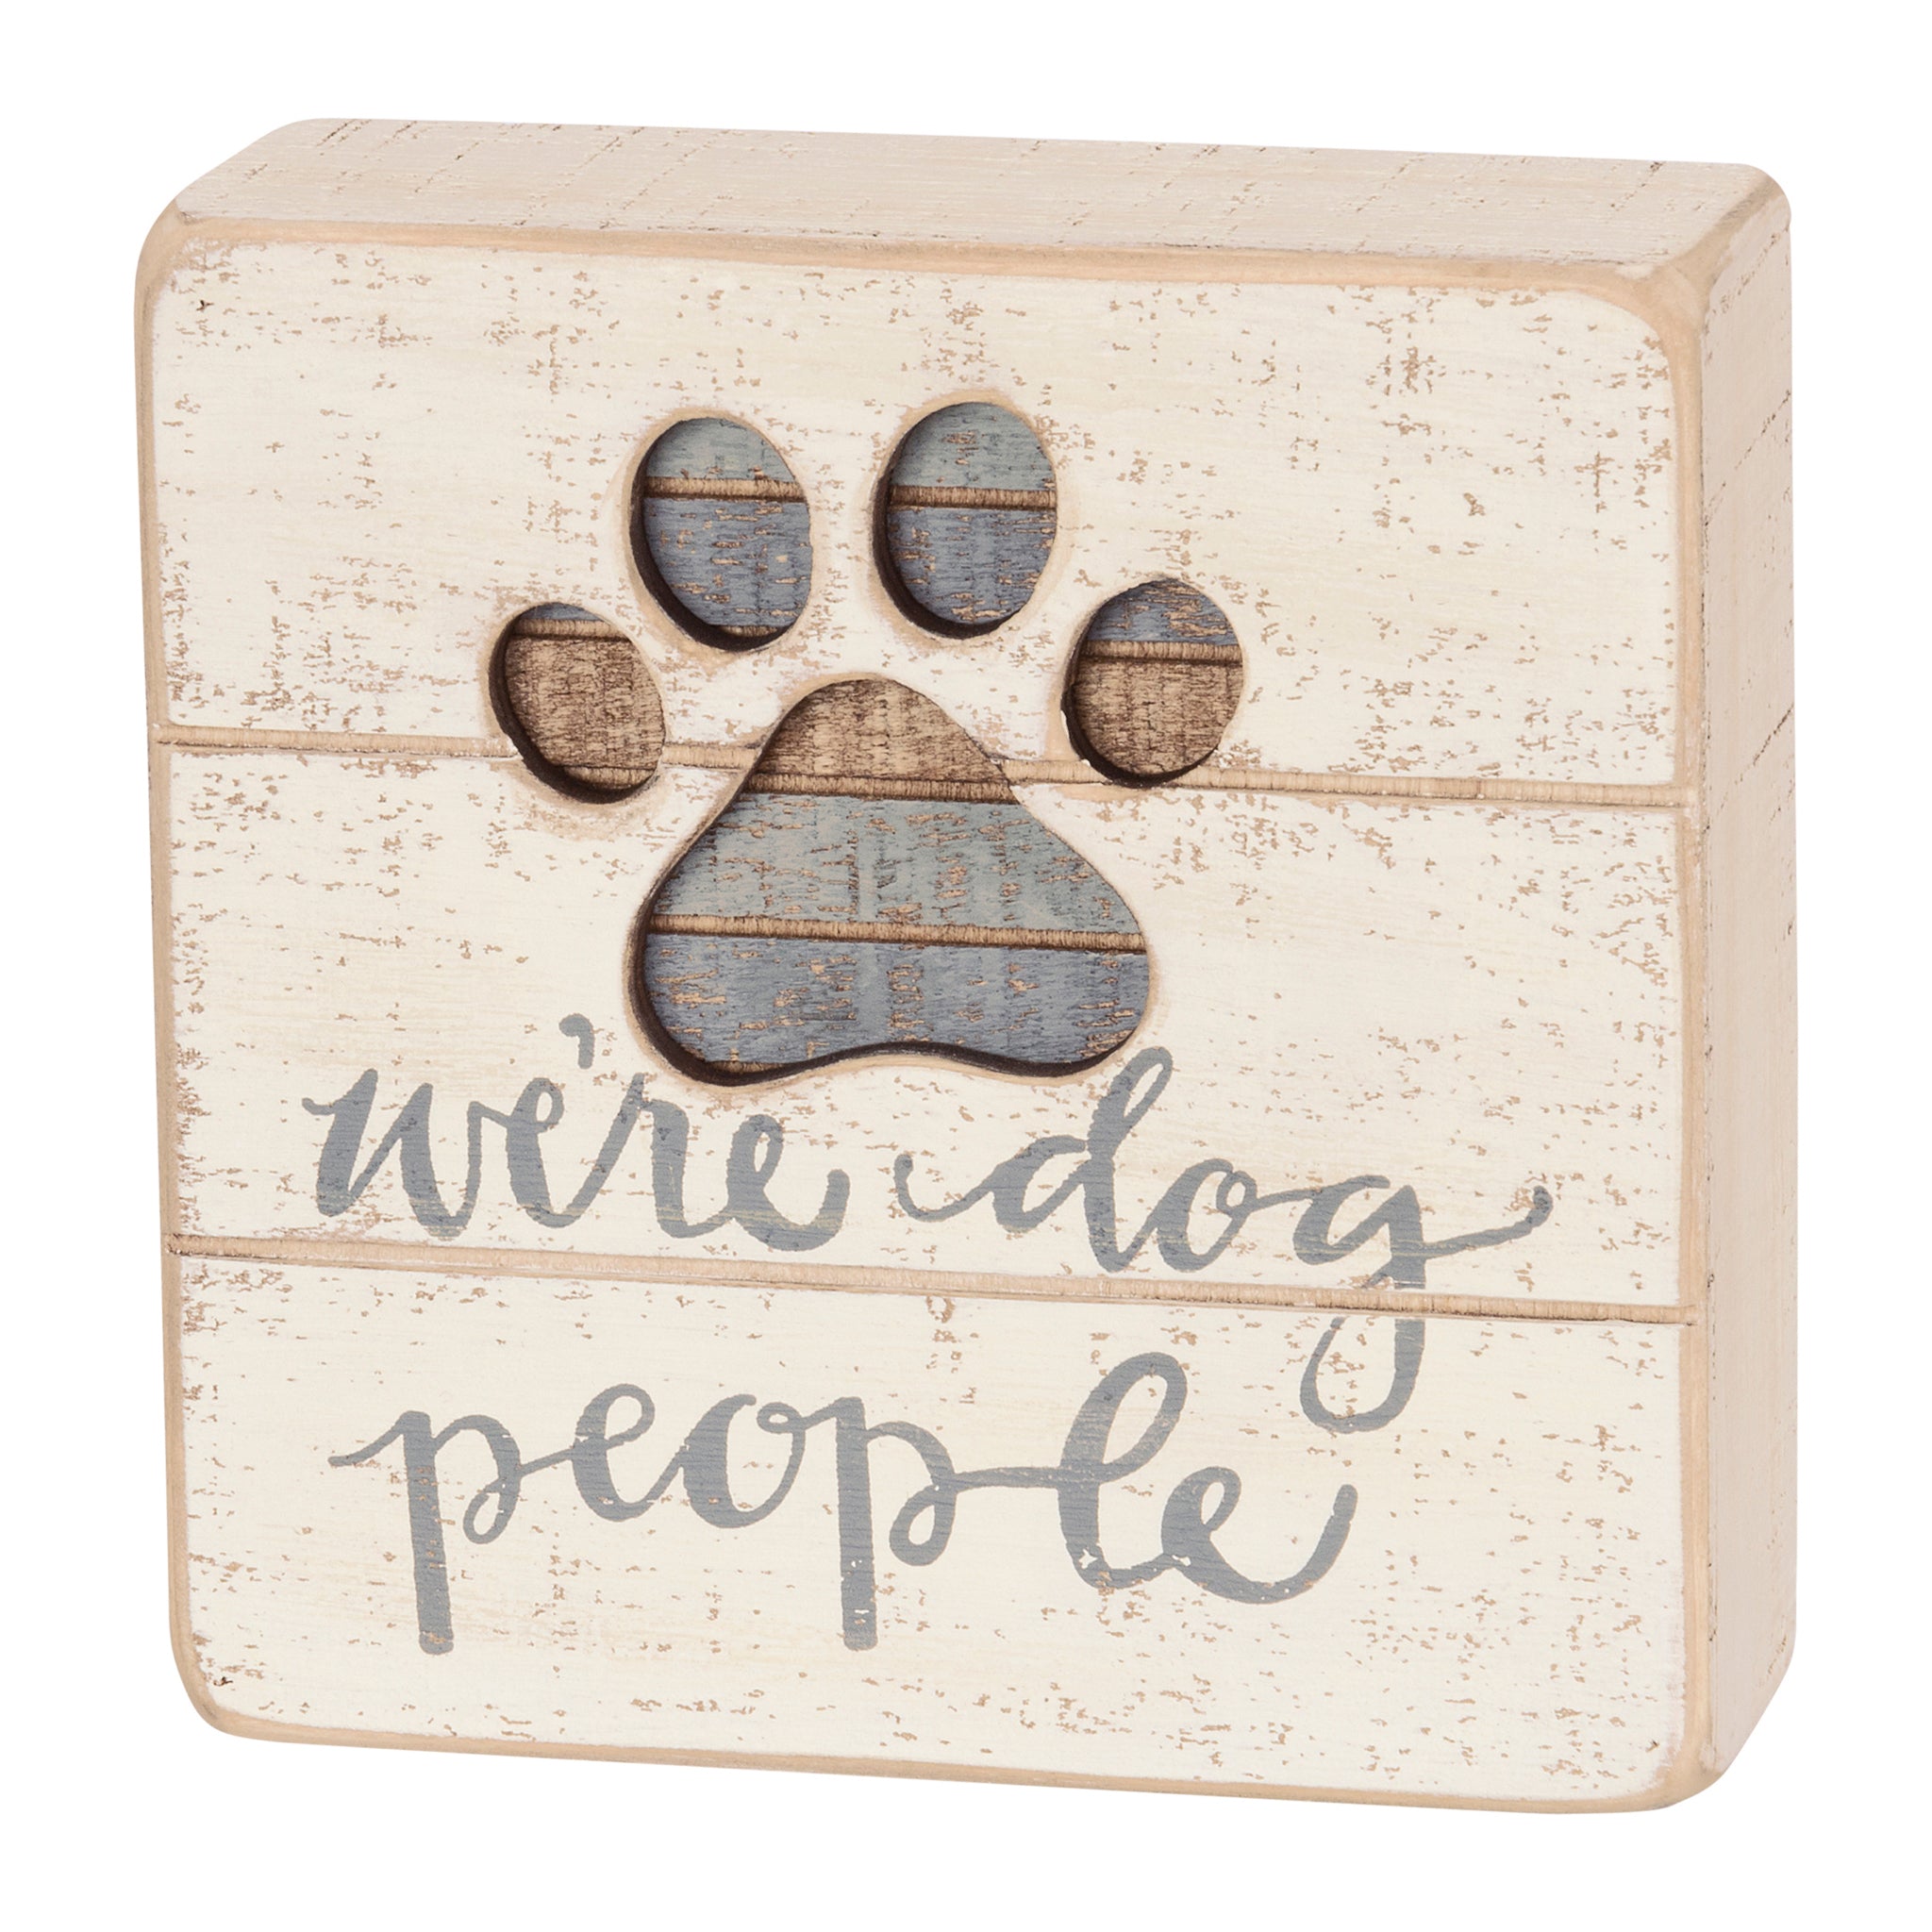 We're Dog People Box Sign